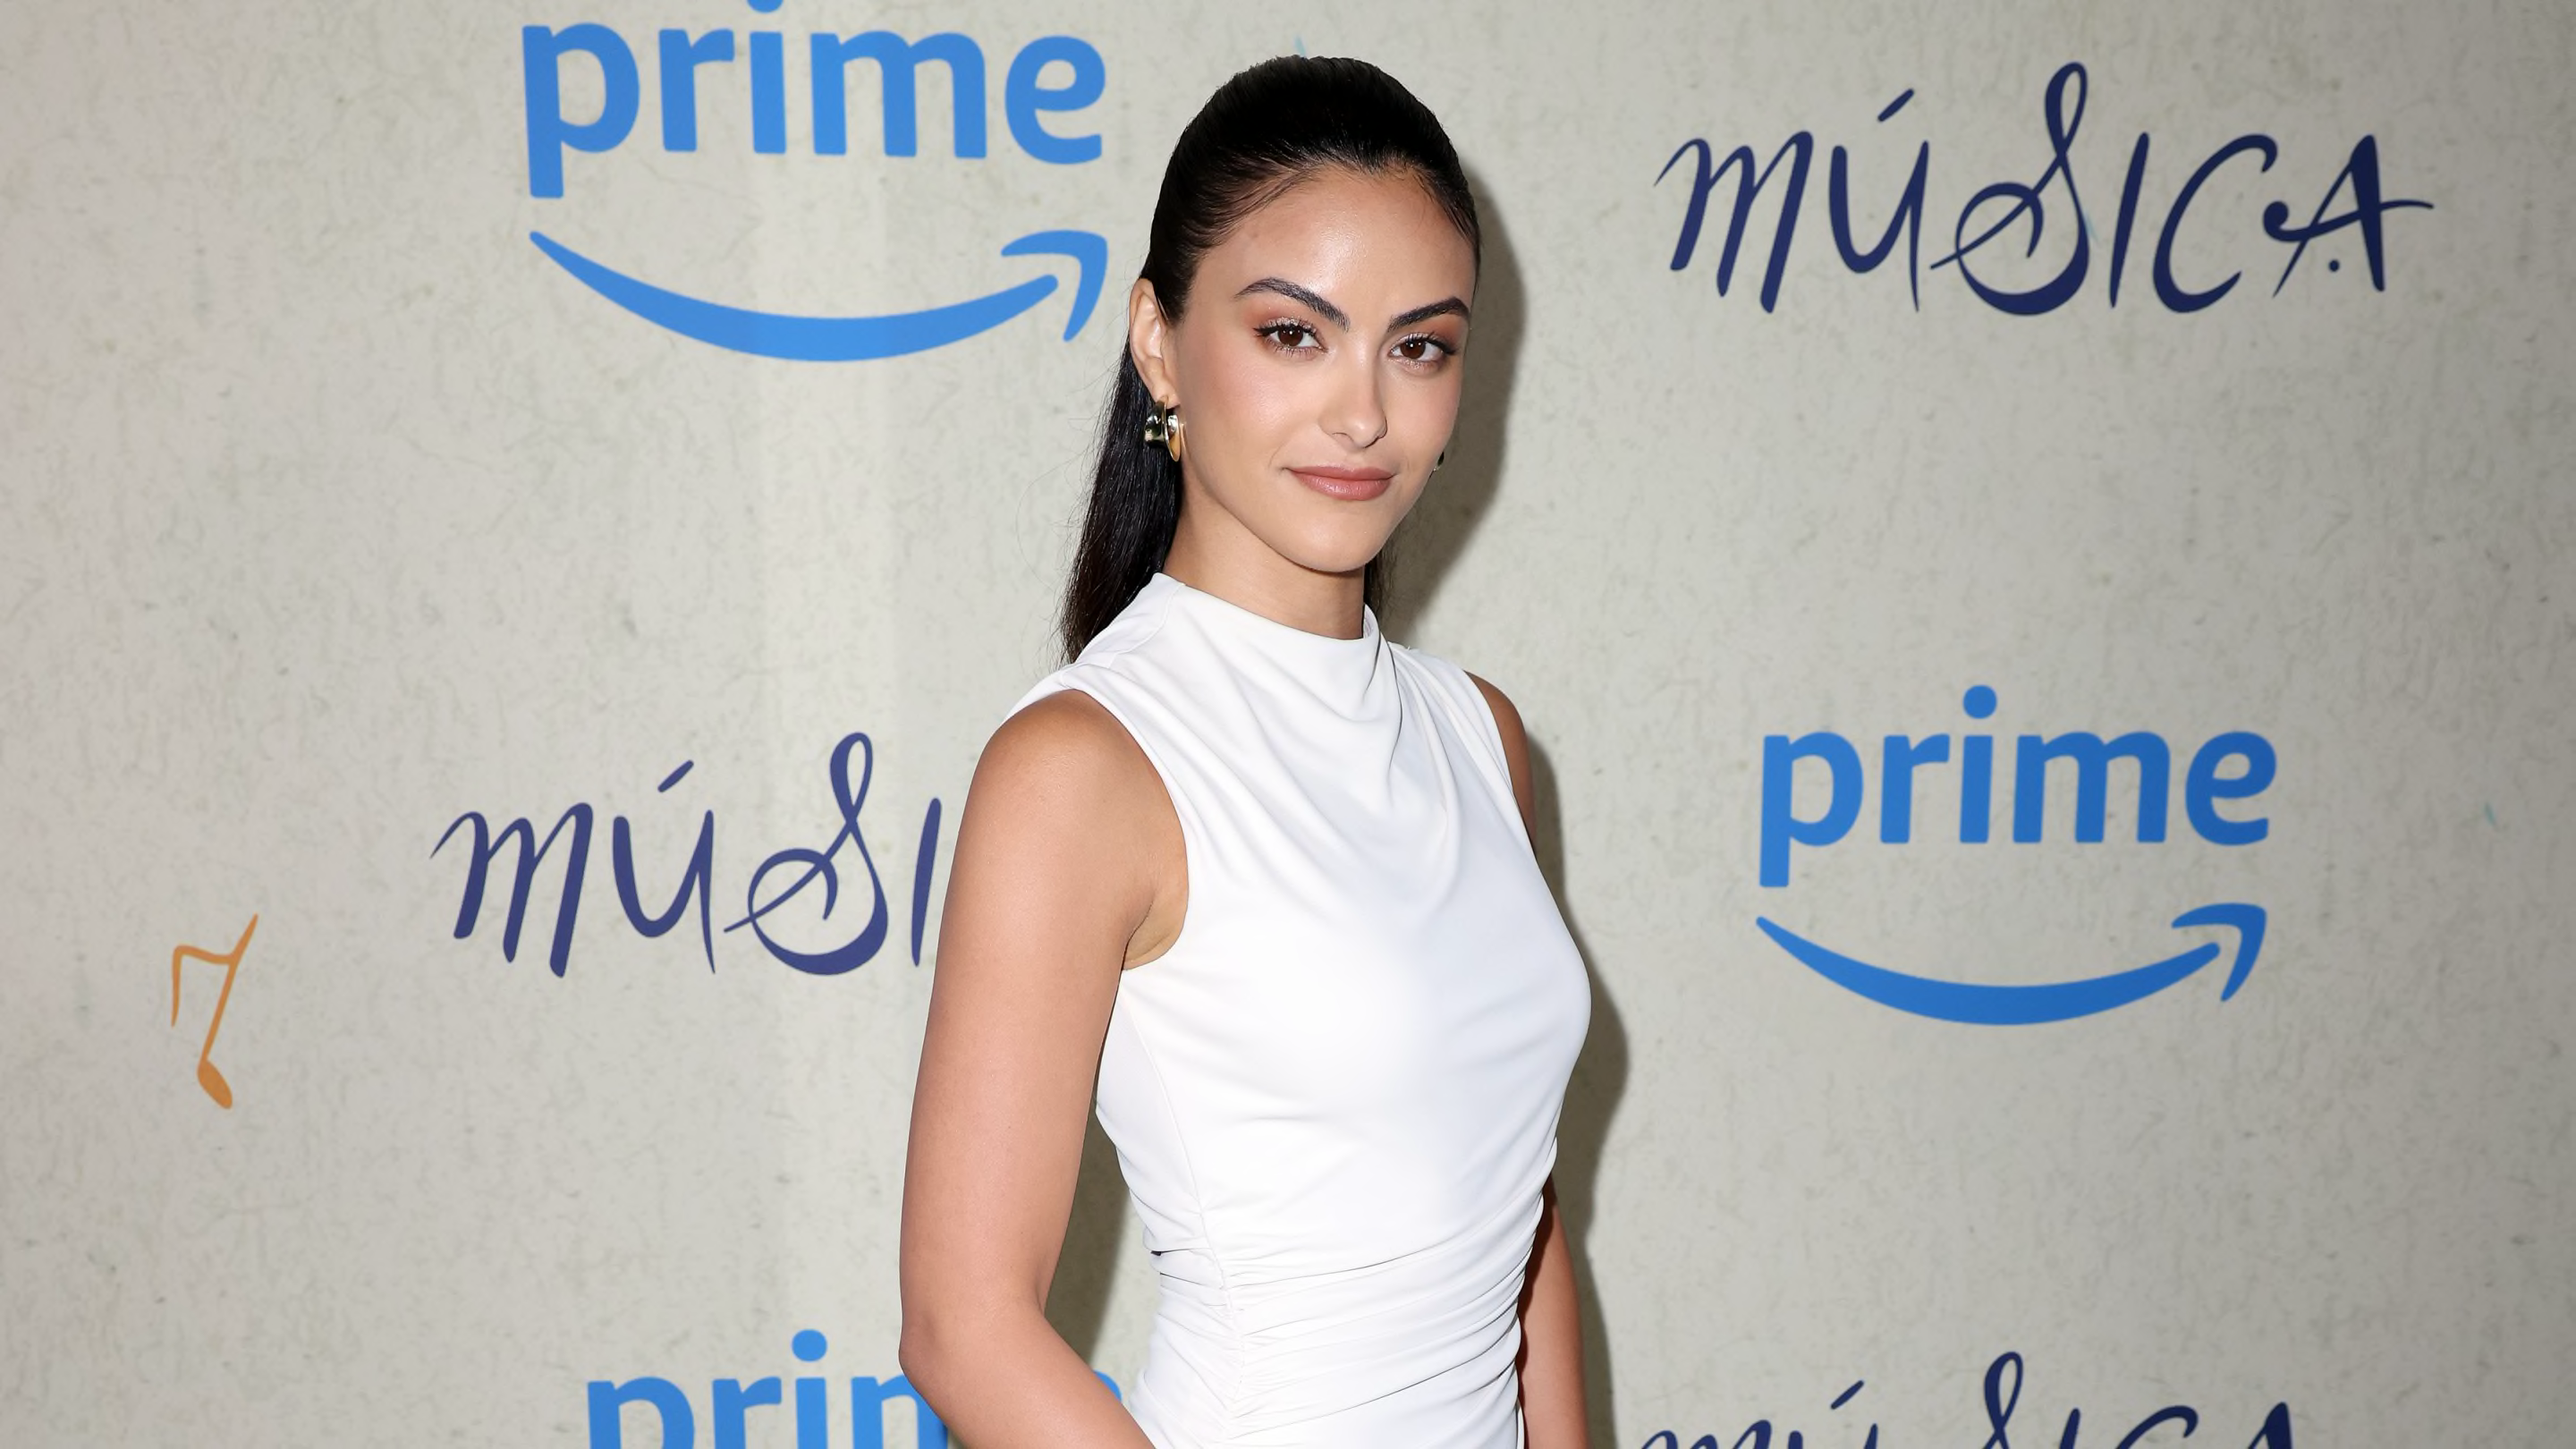 Roundup: Camila Mendes at 'Musica' Premiere; 'Welcome to Wrexham'
Season 3 Delayed; Half of Elite Eight Set